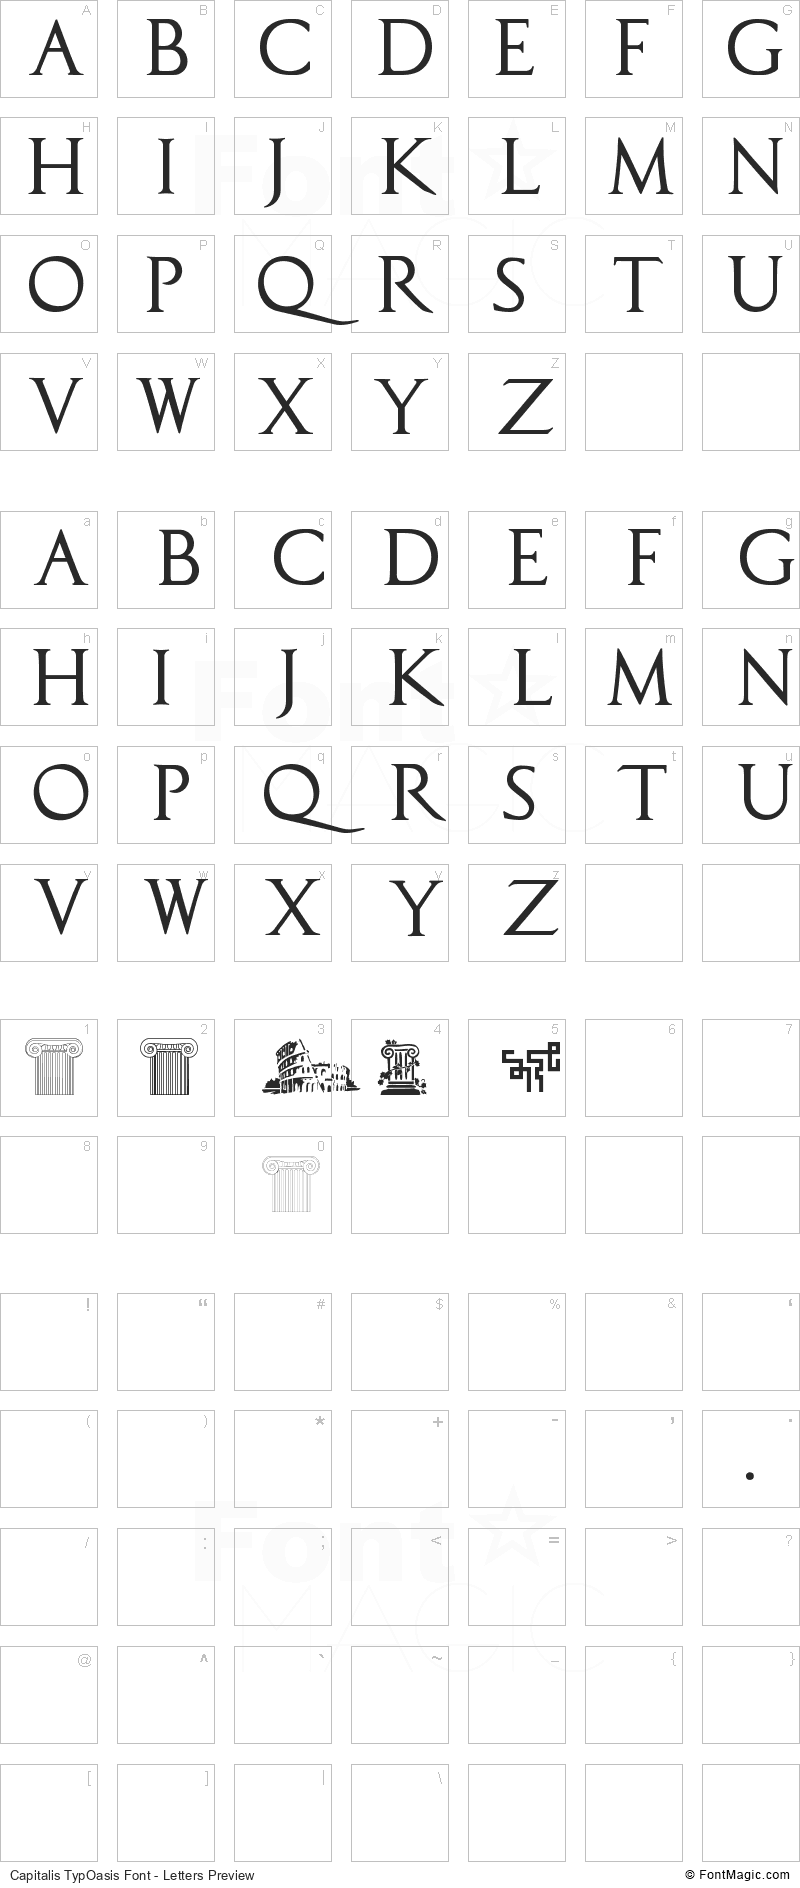 Capitalis TypOasis Font - All Latters Preview Chart